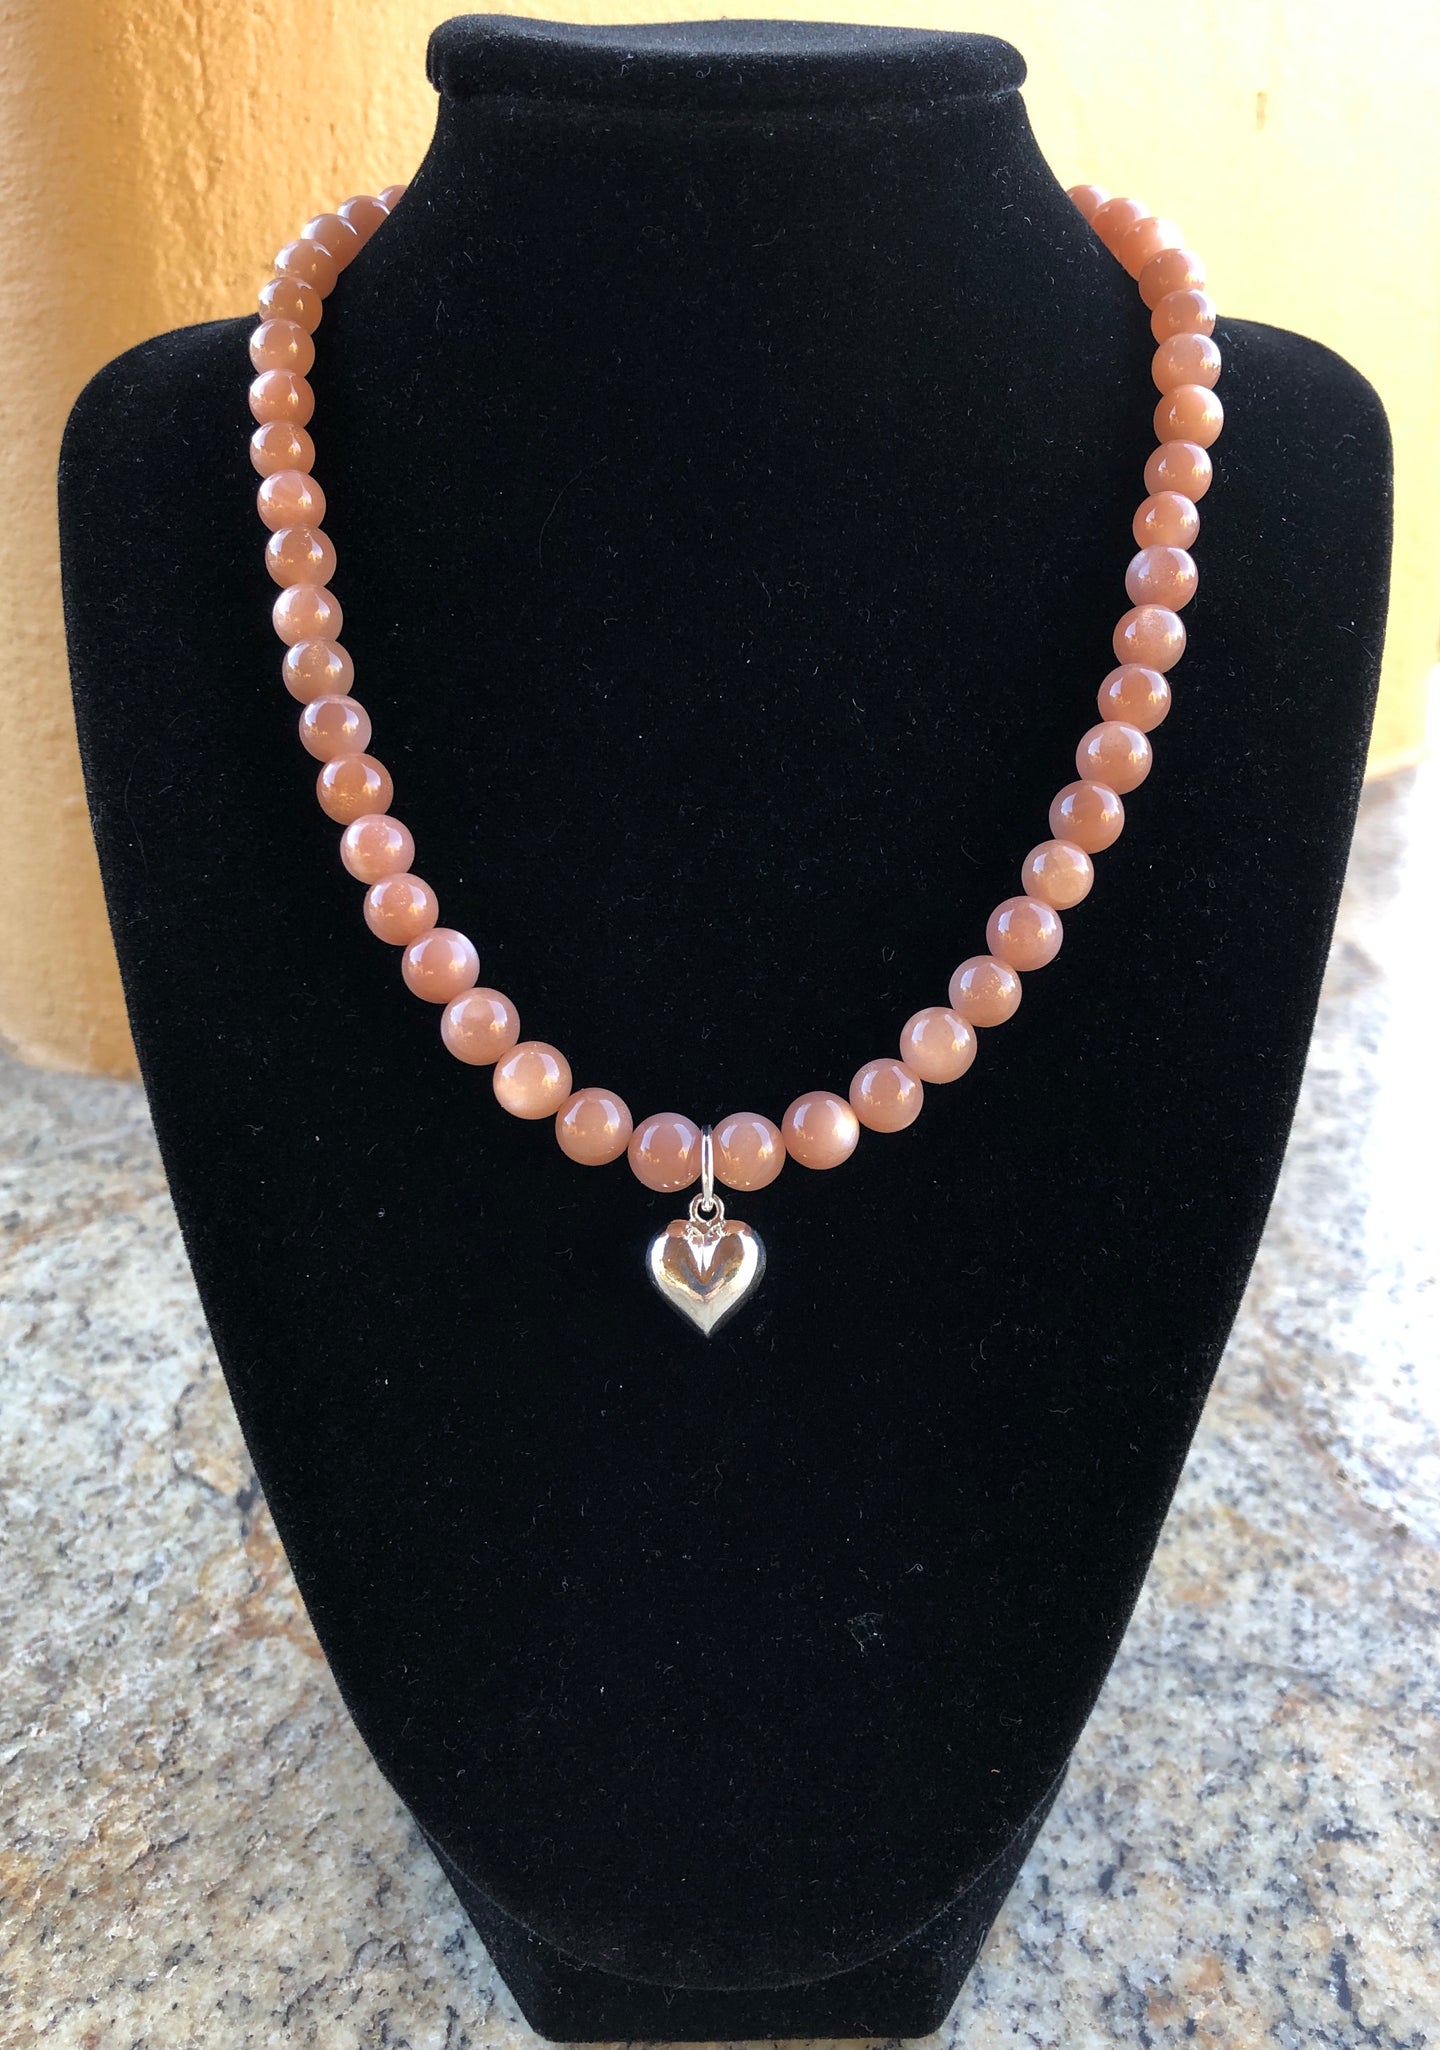 Necklace - Coral Moonstone, Sterling Silver Puff Heart